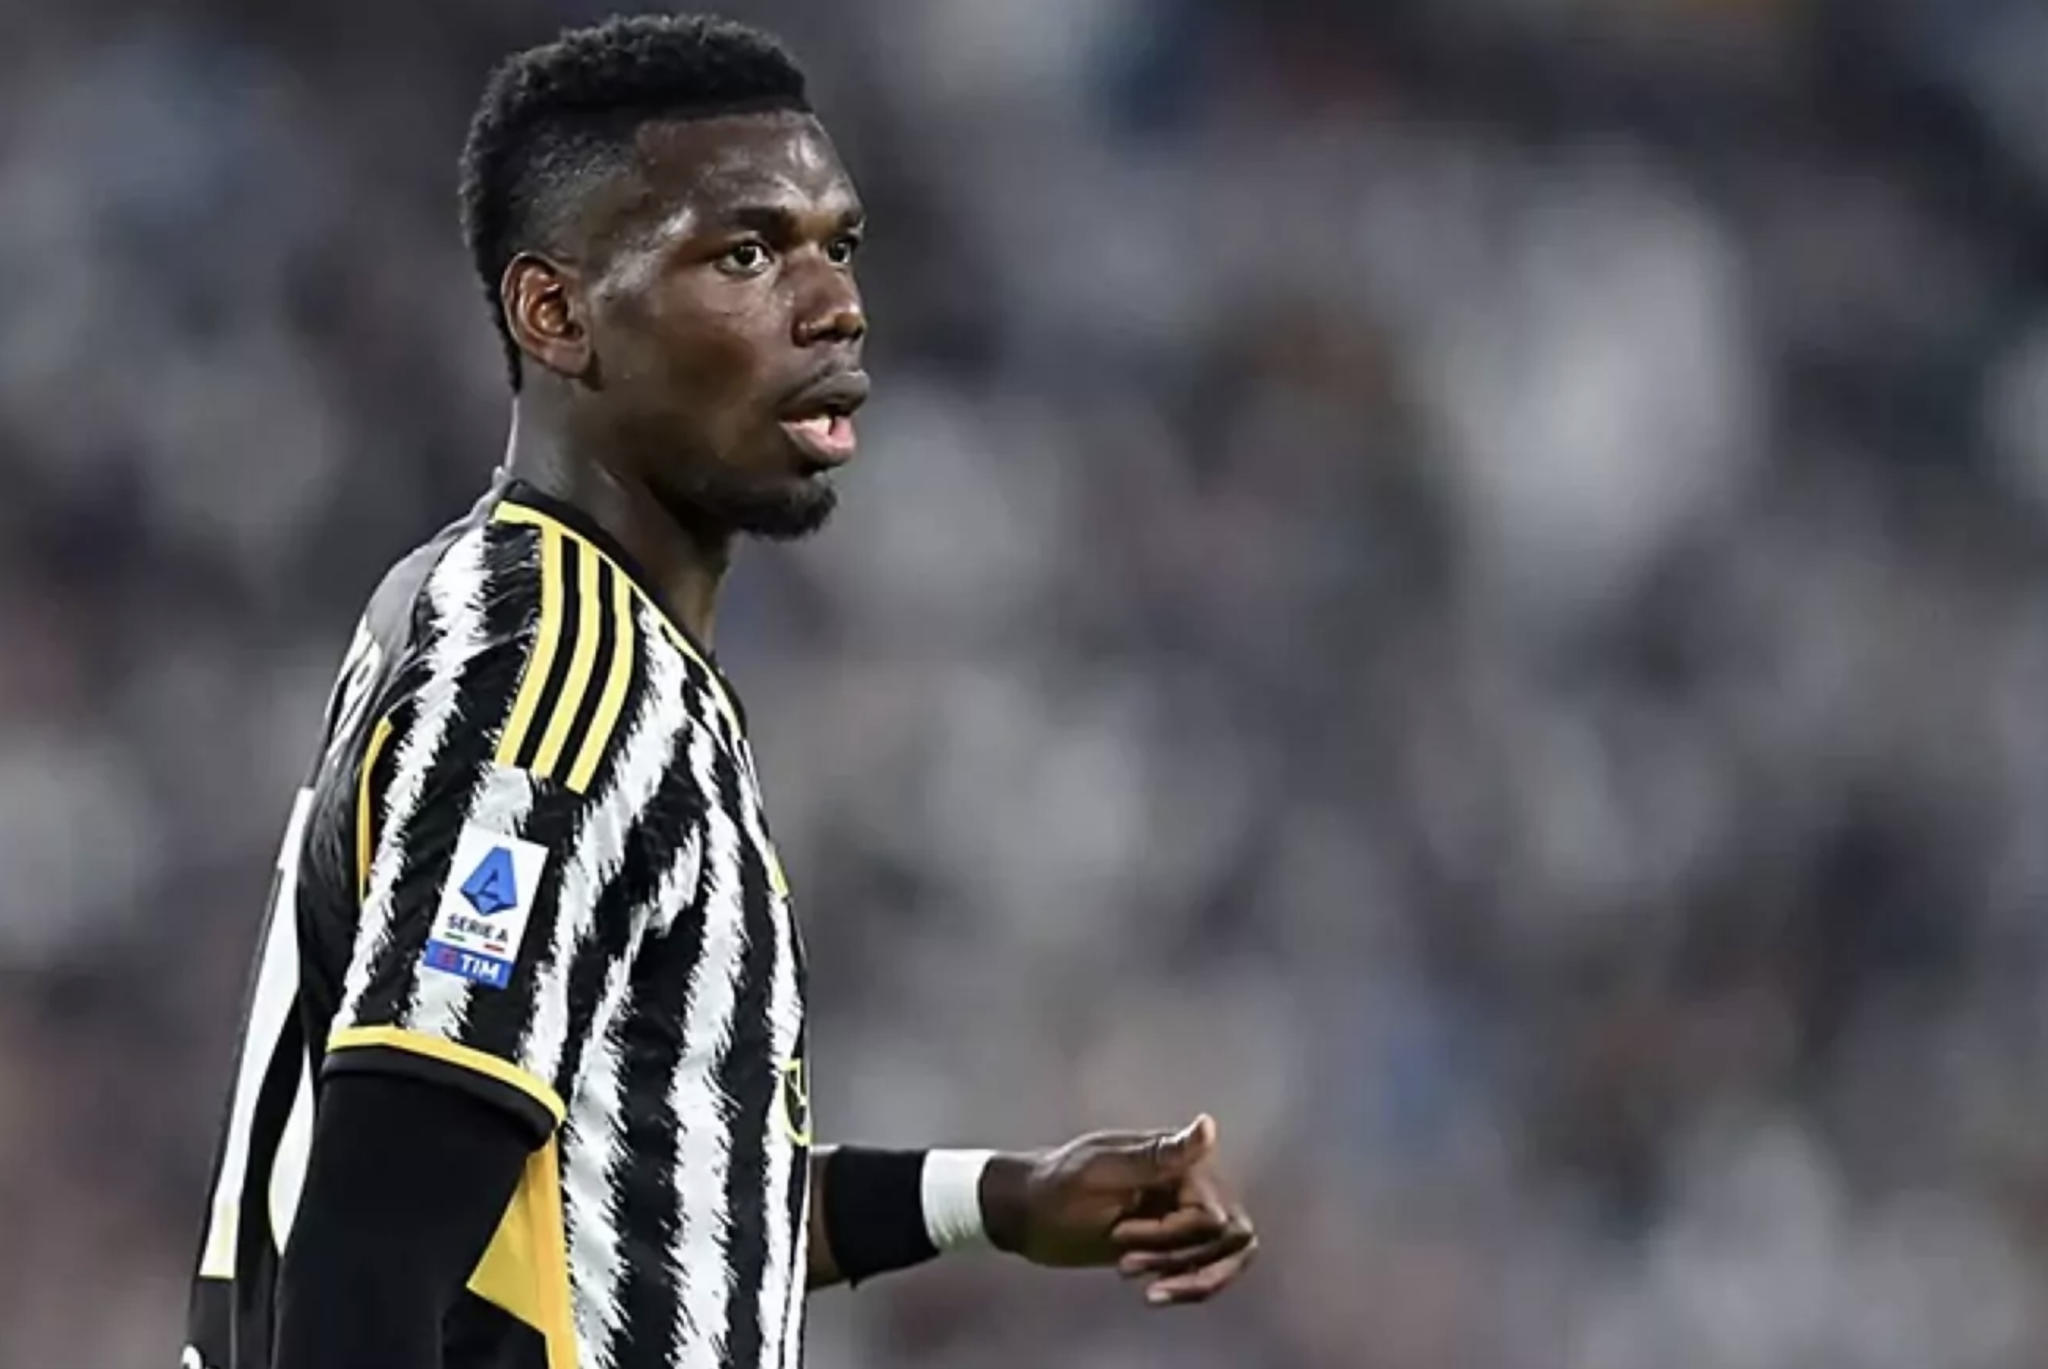 The product that could explain Paul Pogba's positive test: a friend from the USA prescribed it